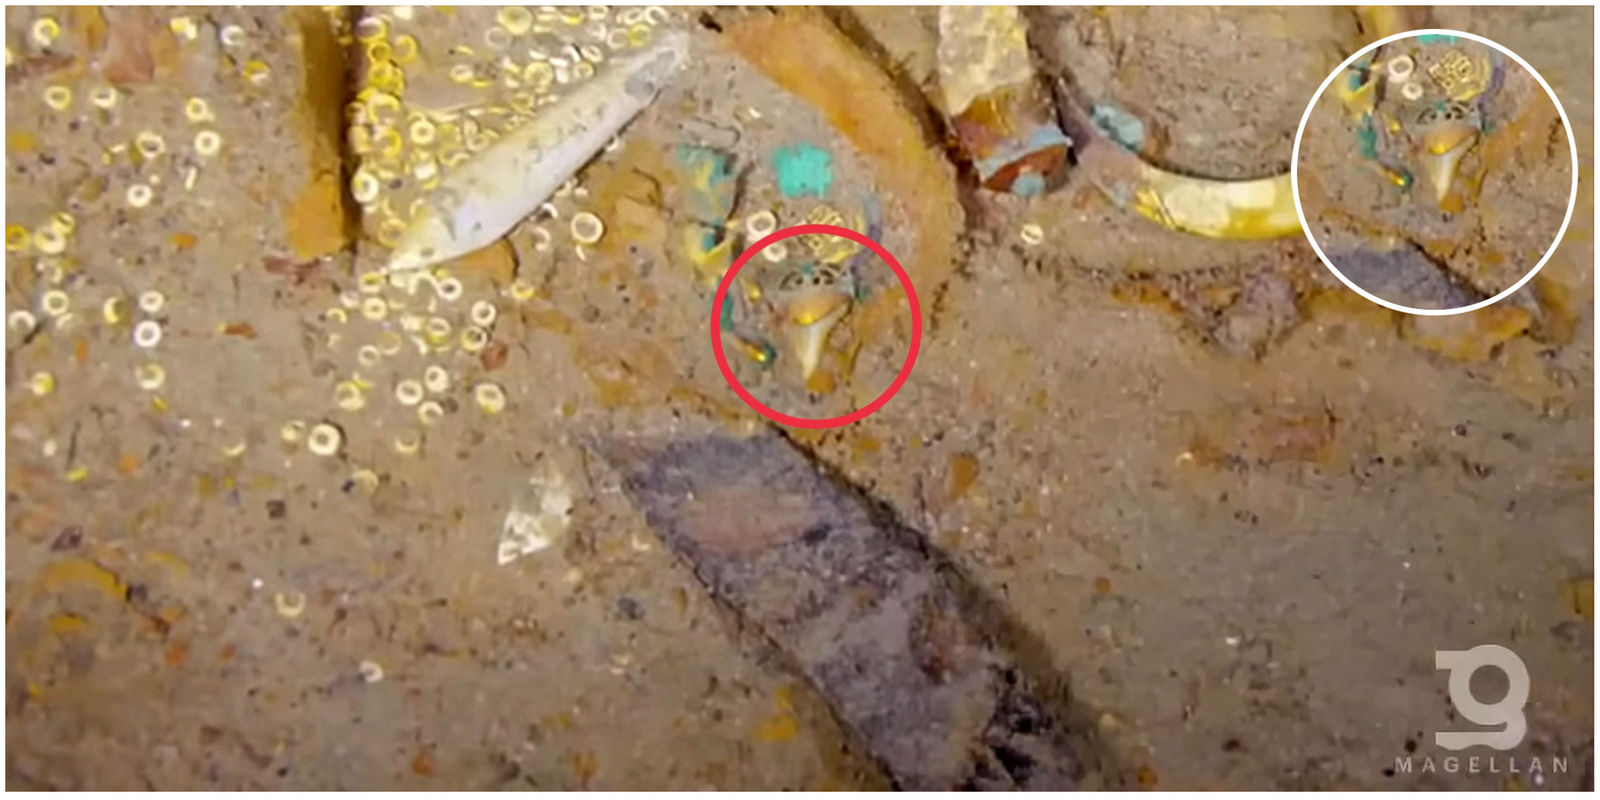 Footage from a deep-sea submersible helped to discover a gold necklace ...